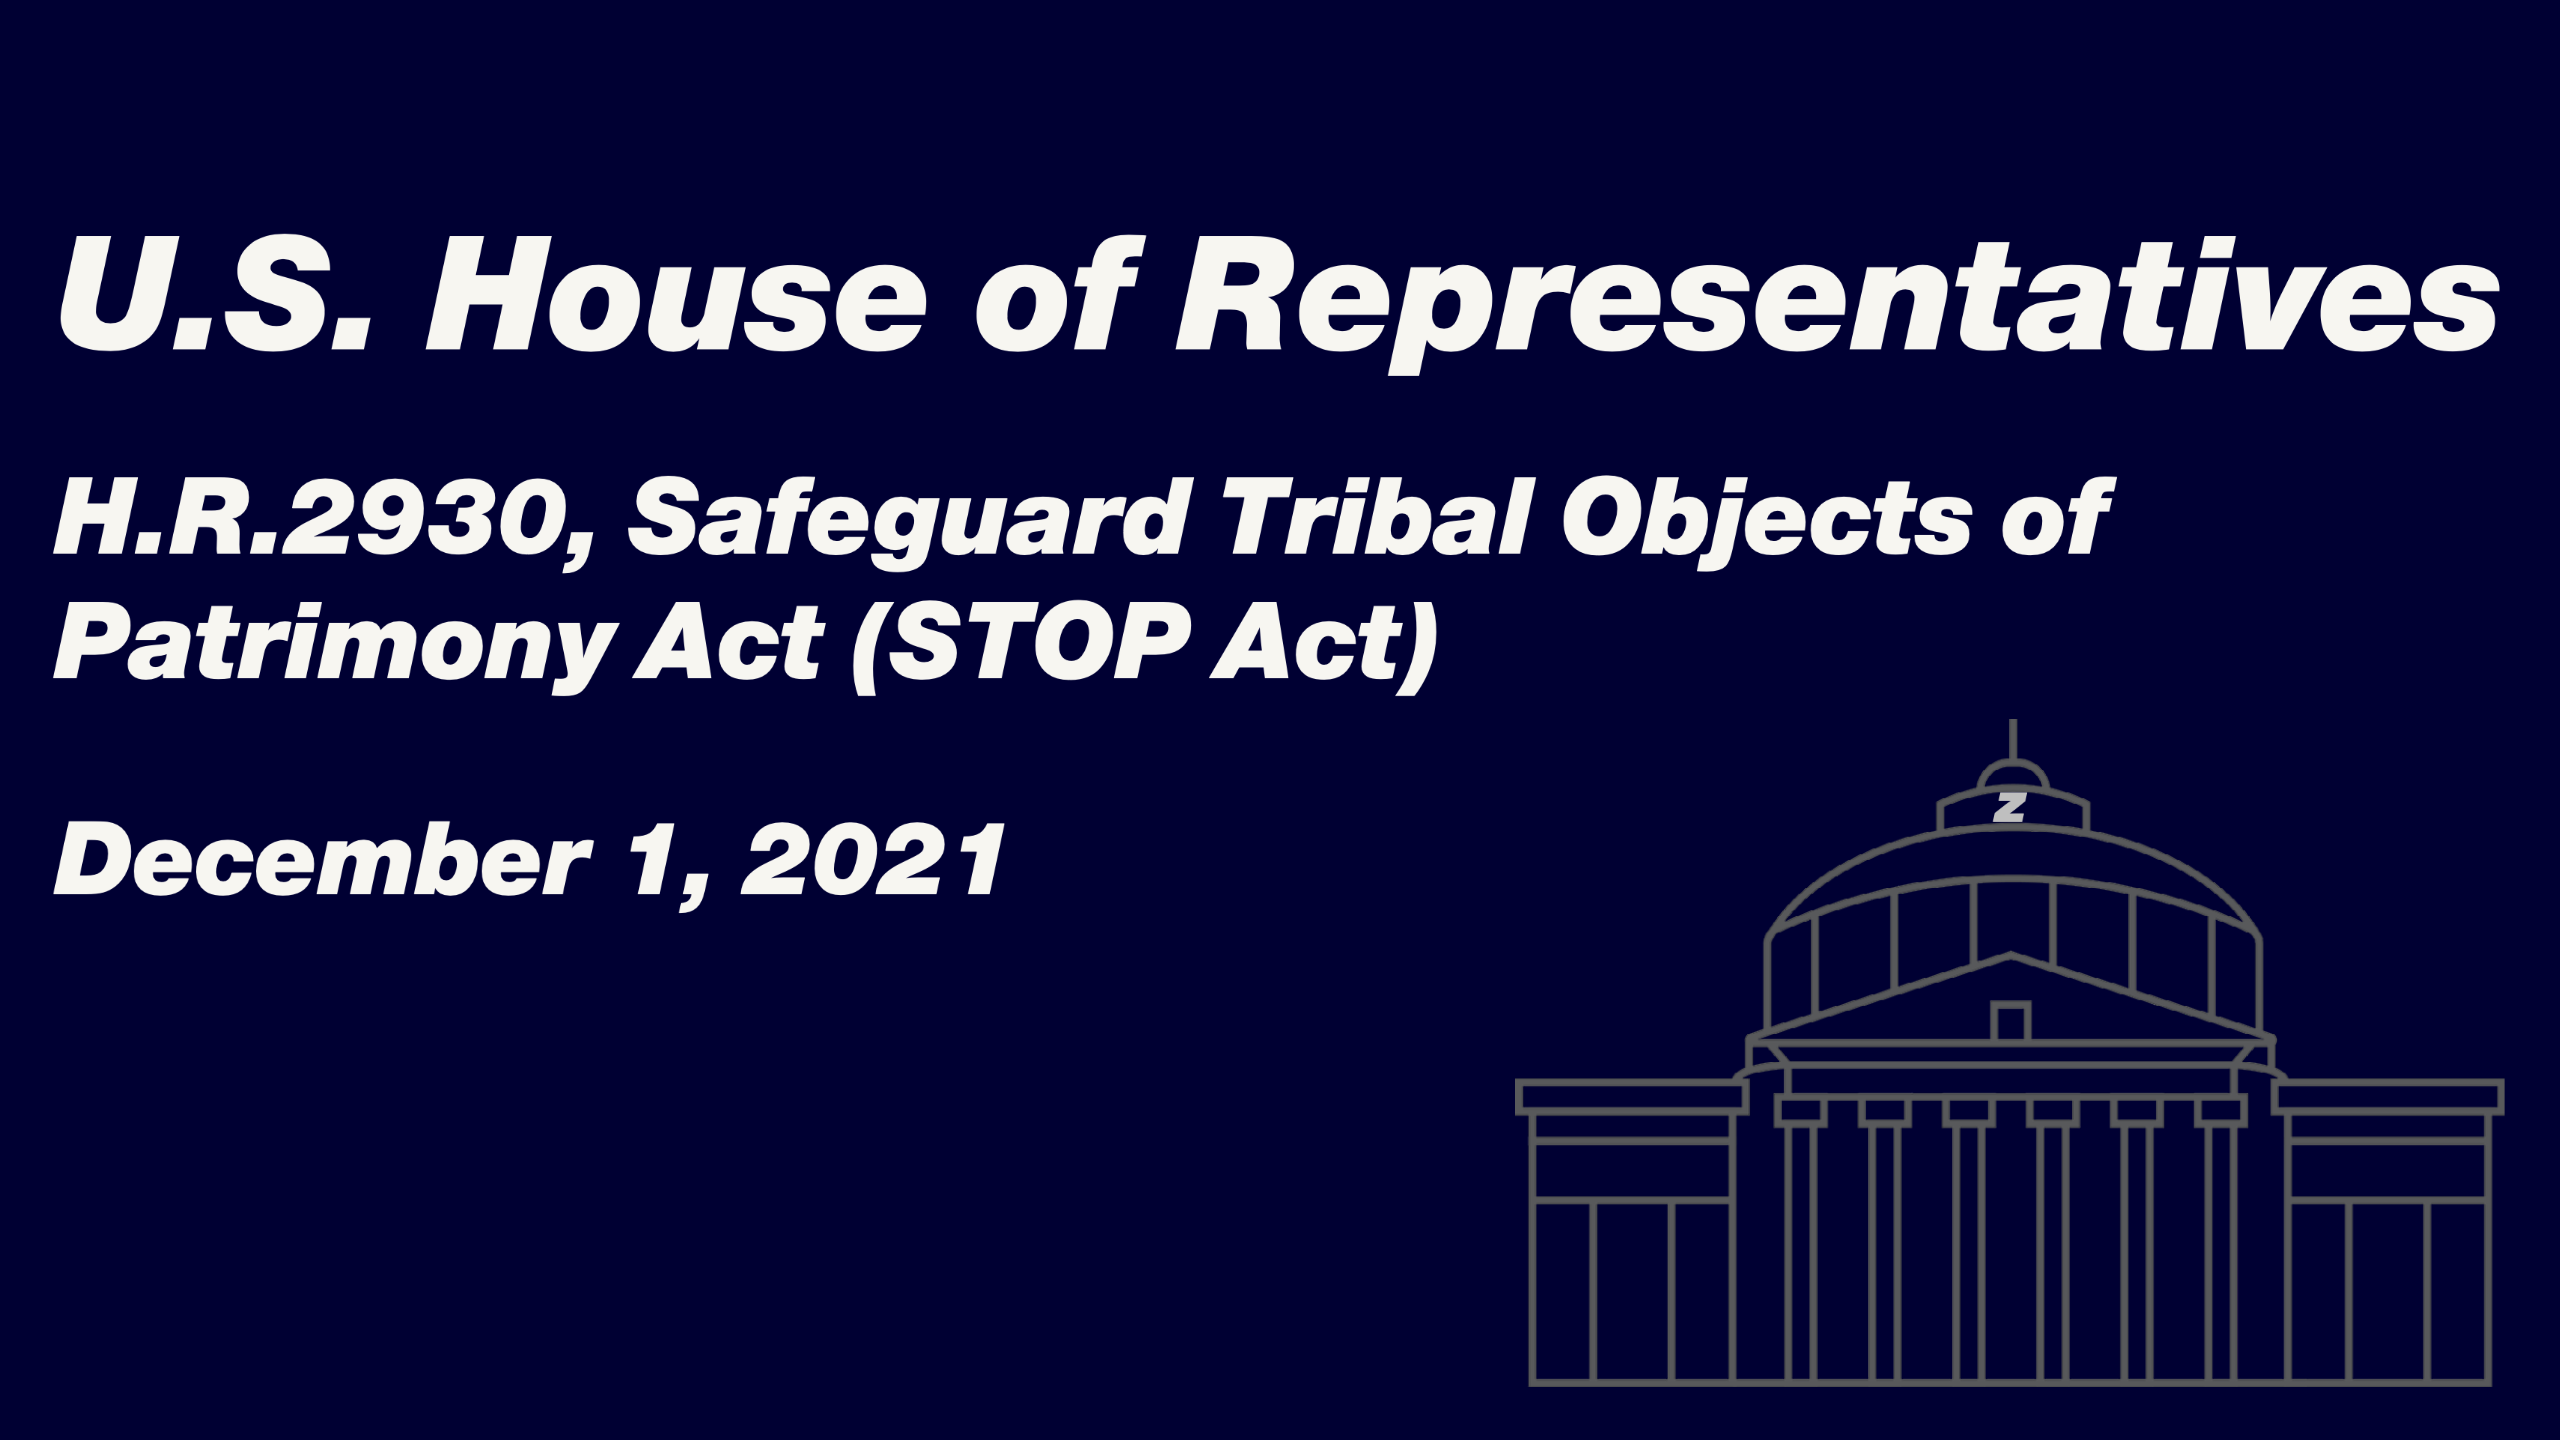 H.R.2930 - Safeguard Tribal Objects of Patrimony Act